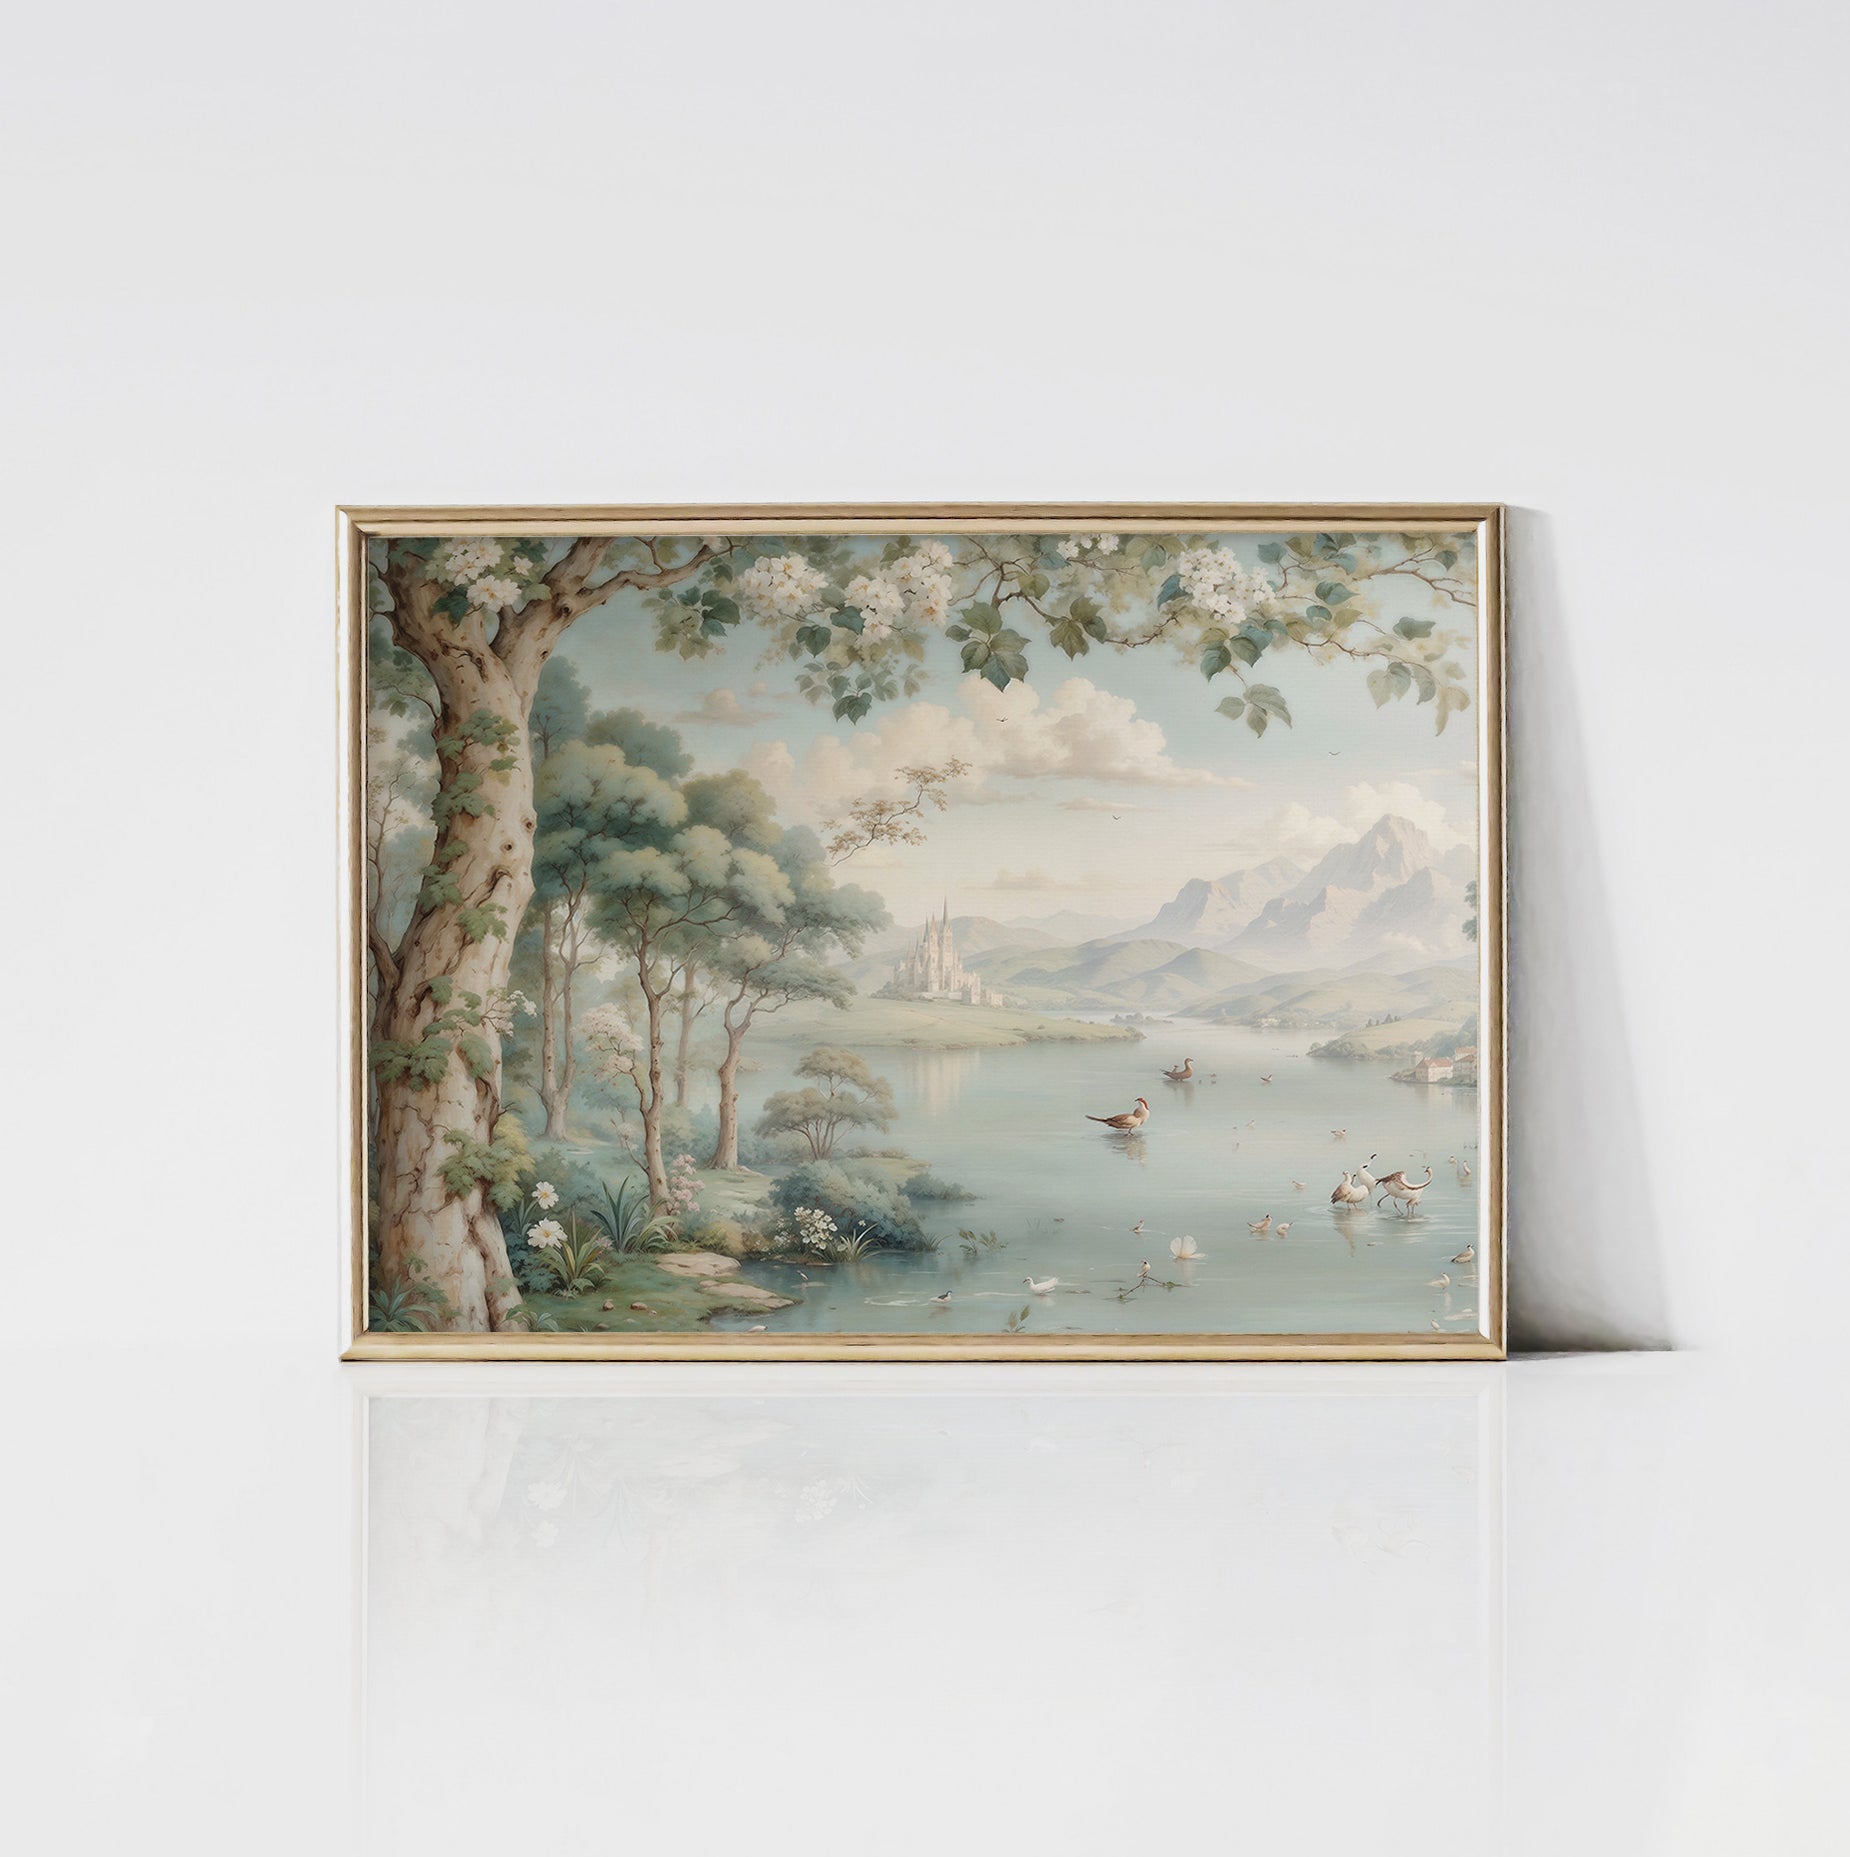 An art print of the tranquil Chamonix Valley framed in gold. The scene features a calm lake surrounded by lush trees, distant mountains, and a castle on the horizon. Birds and ducks enhance the peaceful setting.